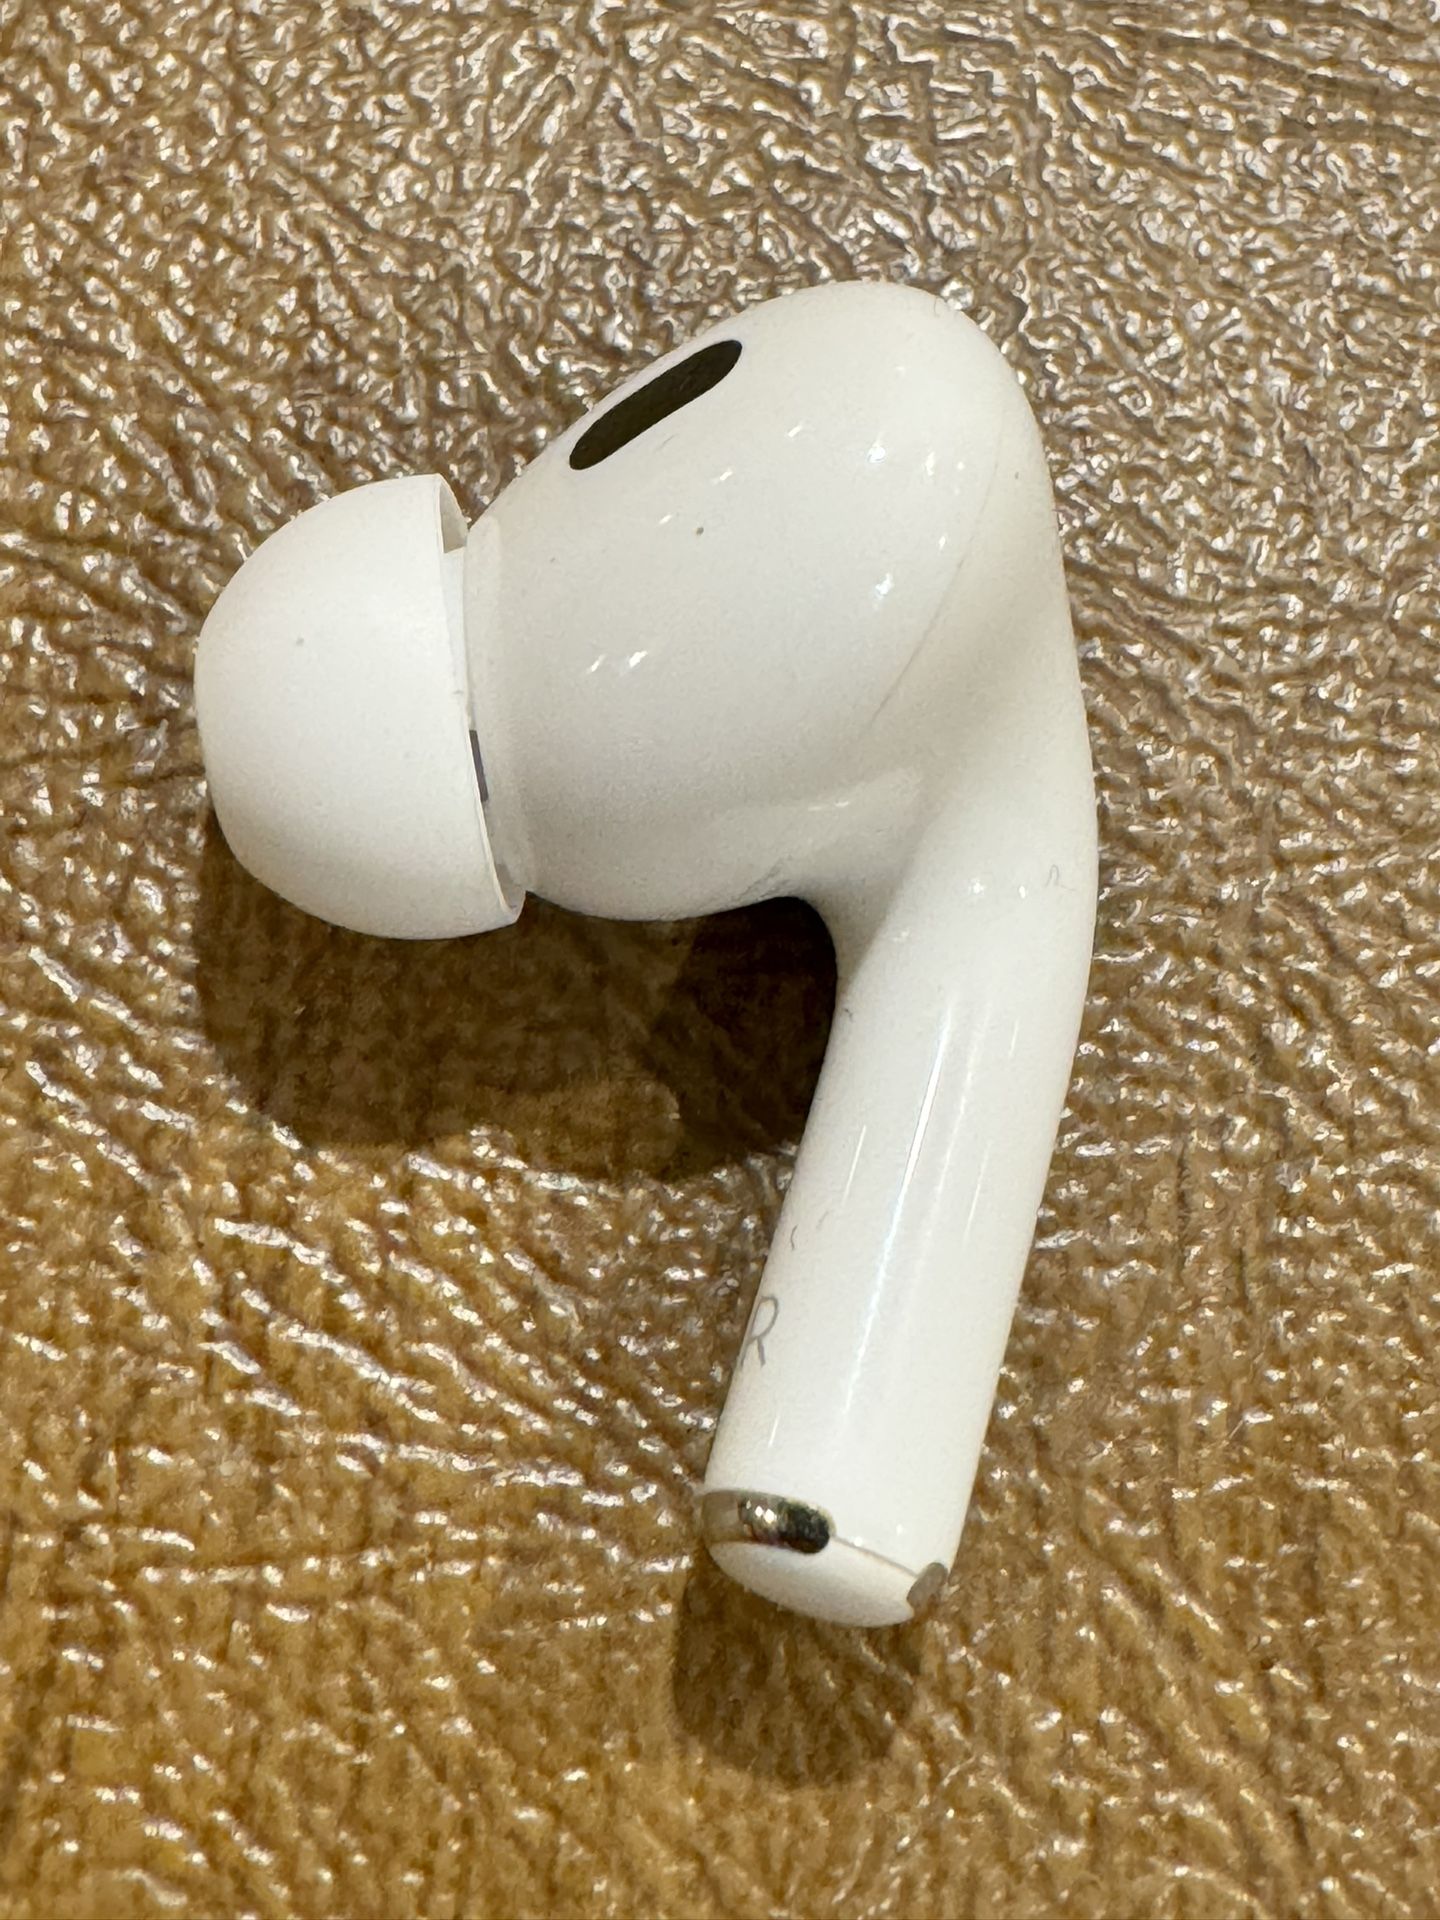 Apple Airpod Pro 2nd generation right Ear. Excellent Condition 